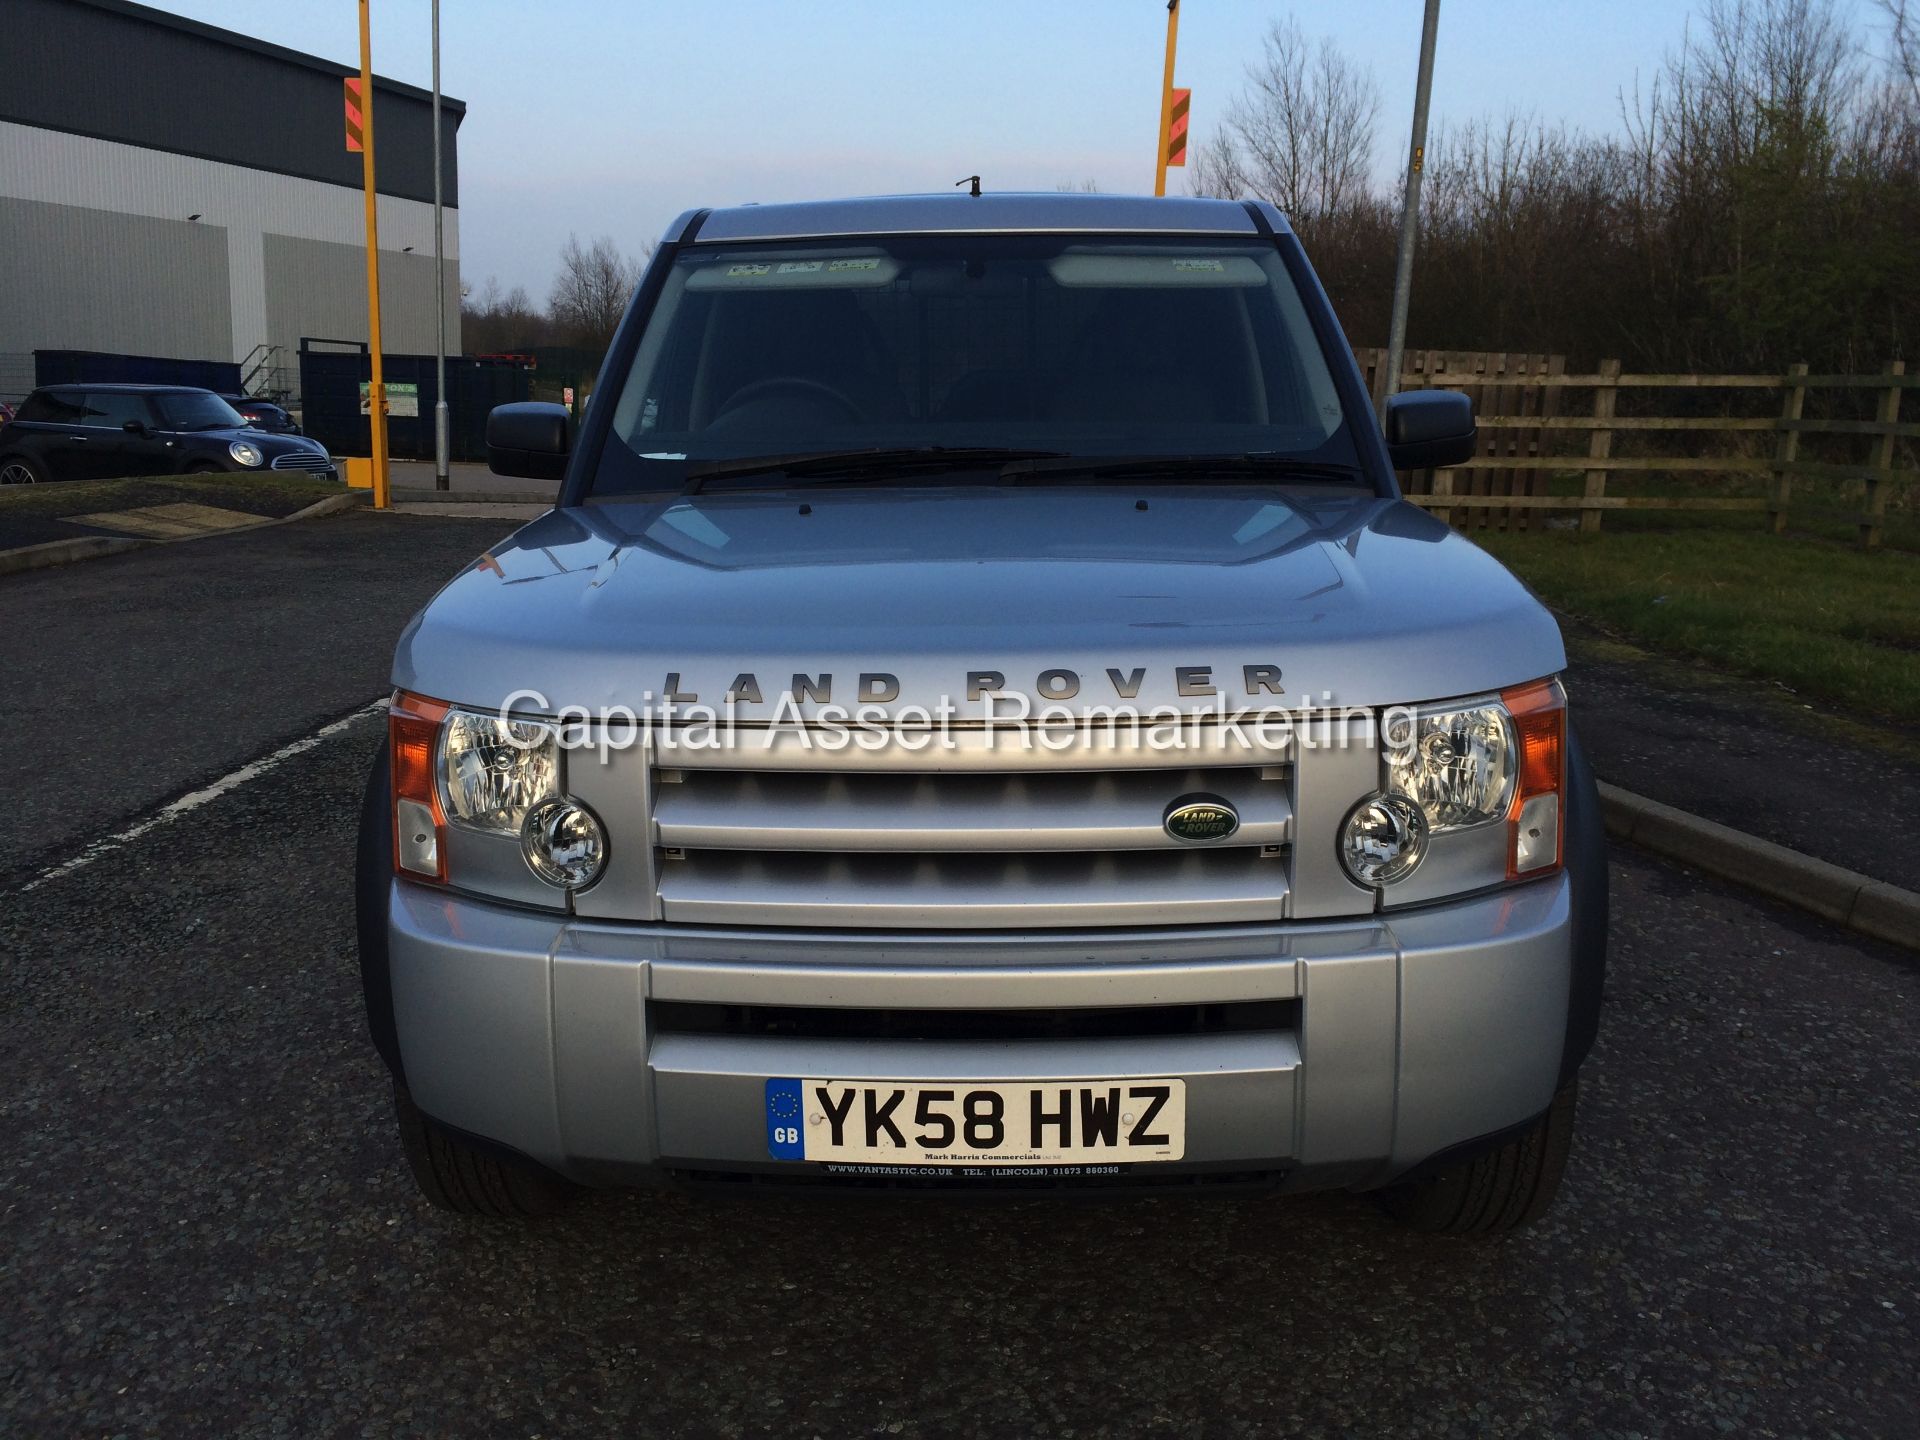 LANDROVER DISCOVERY 3 "TDV6" AUTOMATIC - 1 PREVIOUS OWNER FROM NEW - AIR SUSPENSION - PRIVACY GLASS! - Image 8 of 18